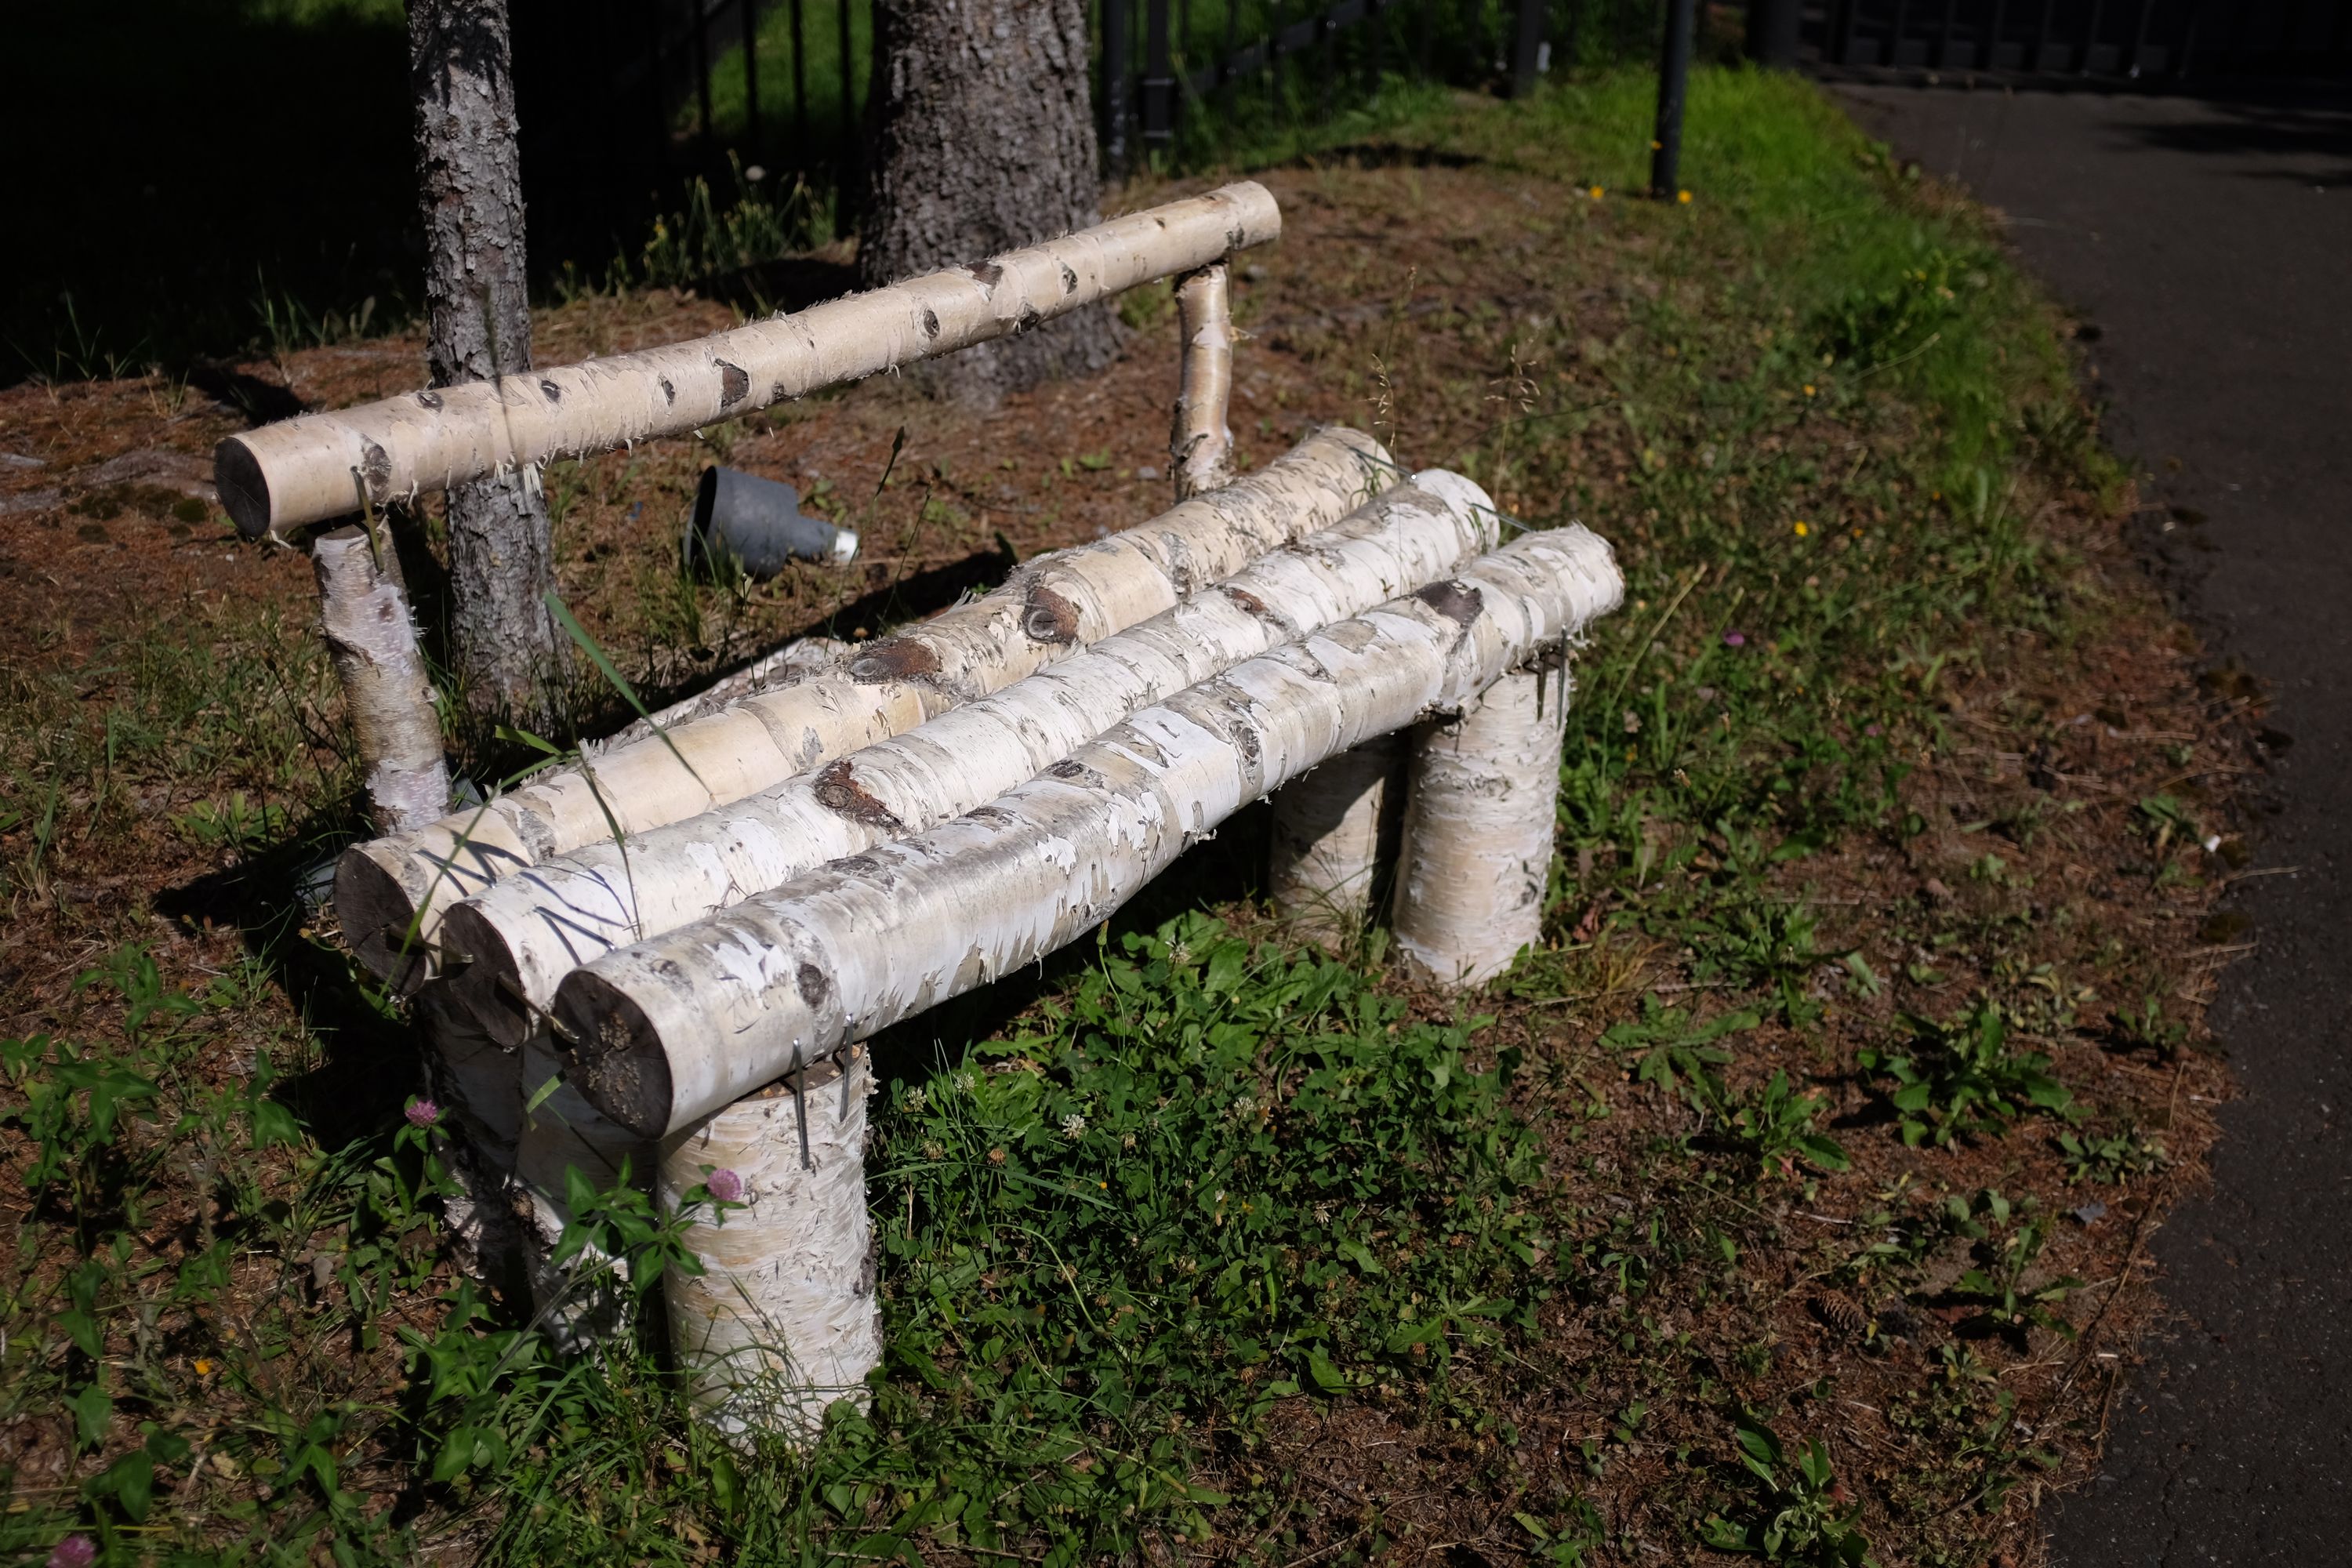 A bench made of white birch logs.